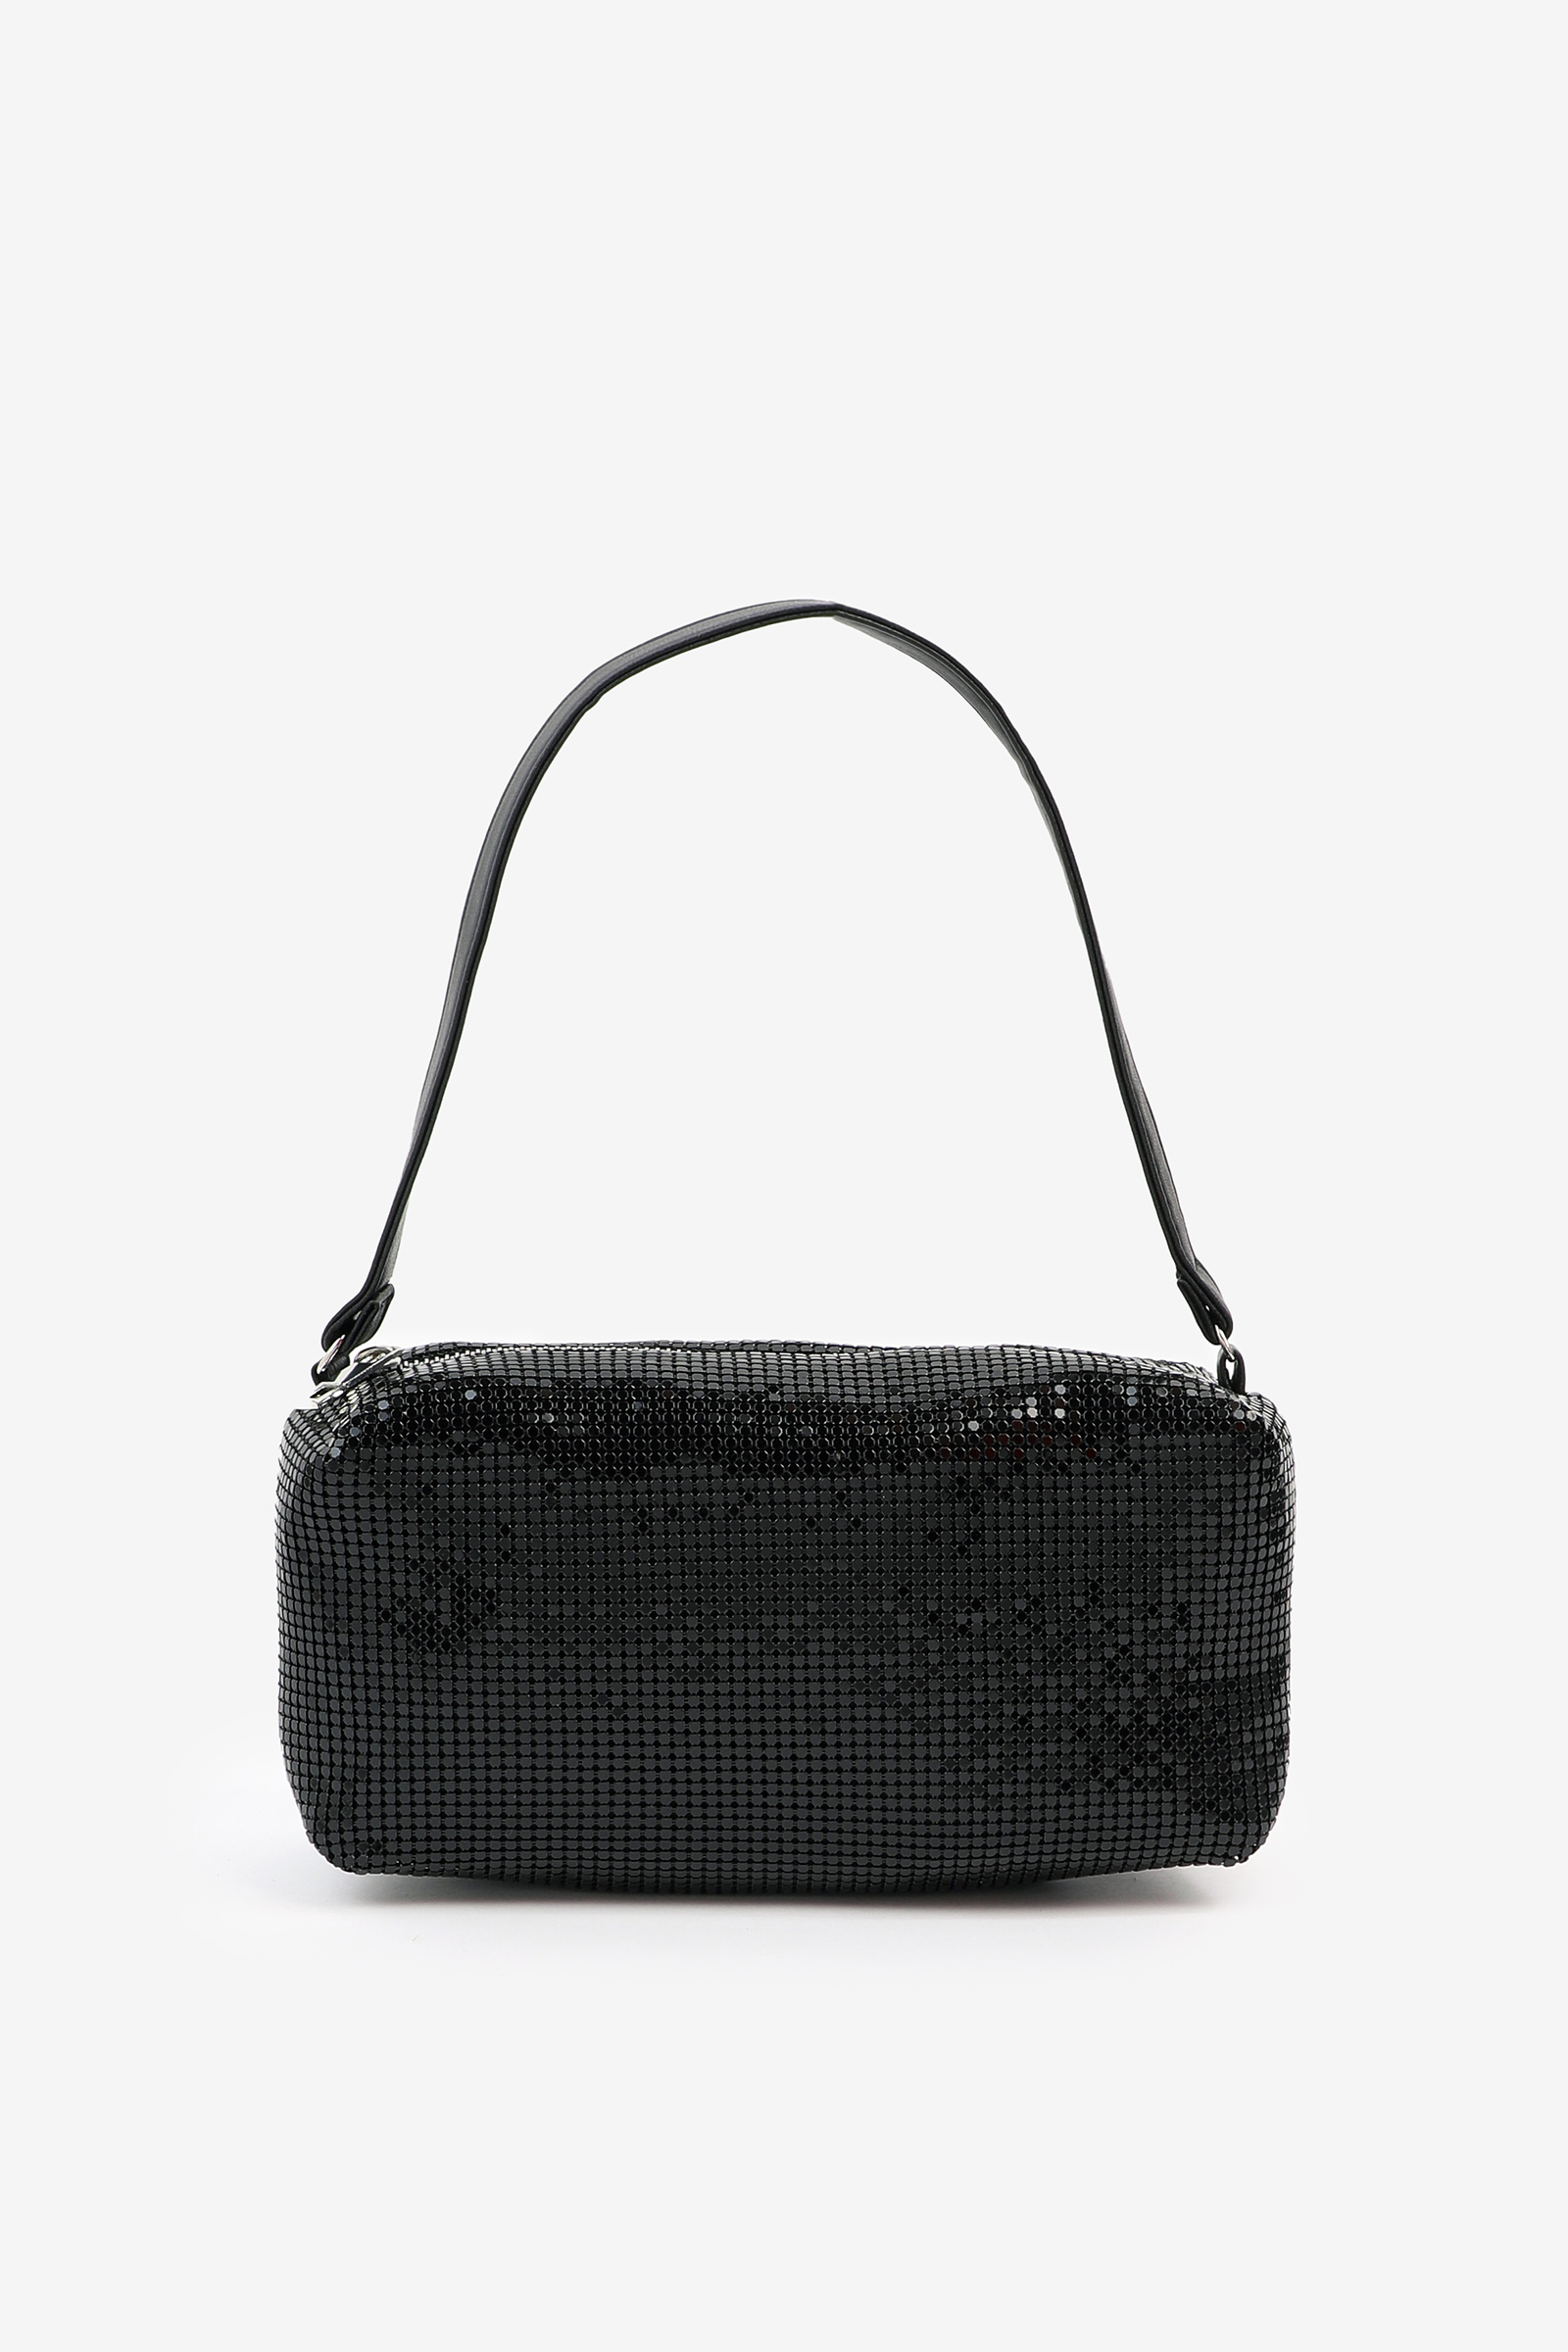 Ardene A.C.W. Metallic Baguette Bag in Black | Faux Leather/Polyester